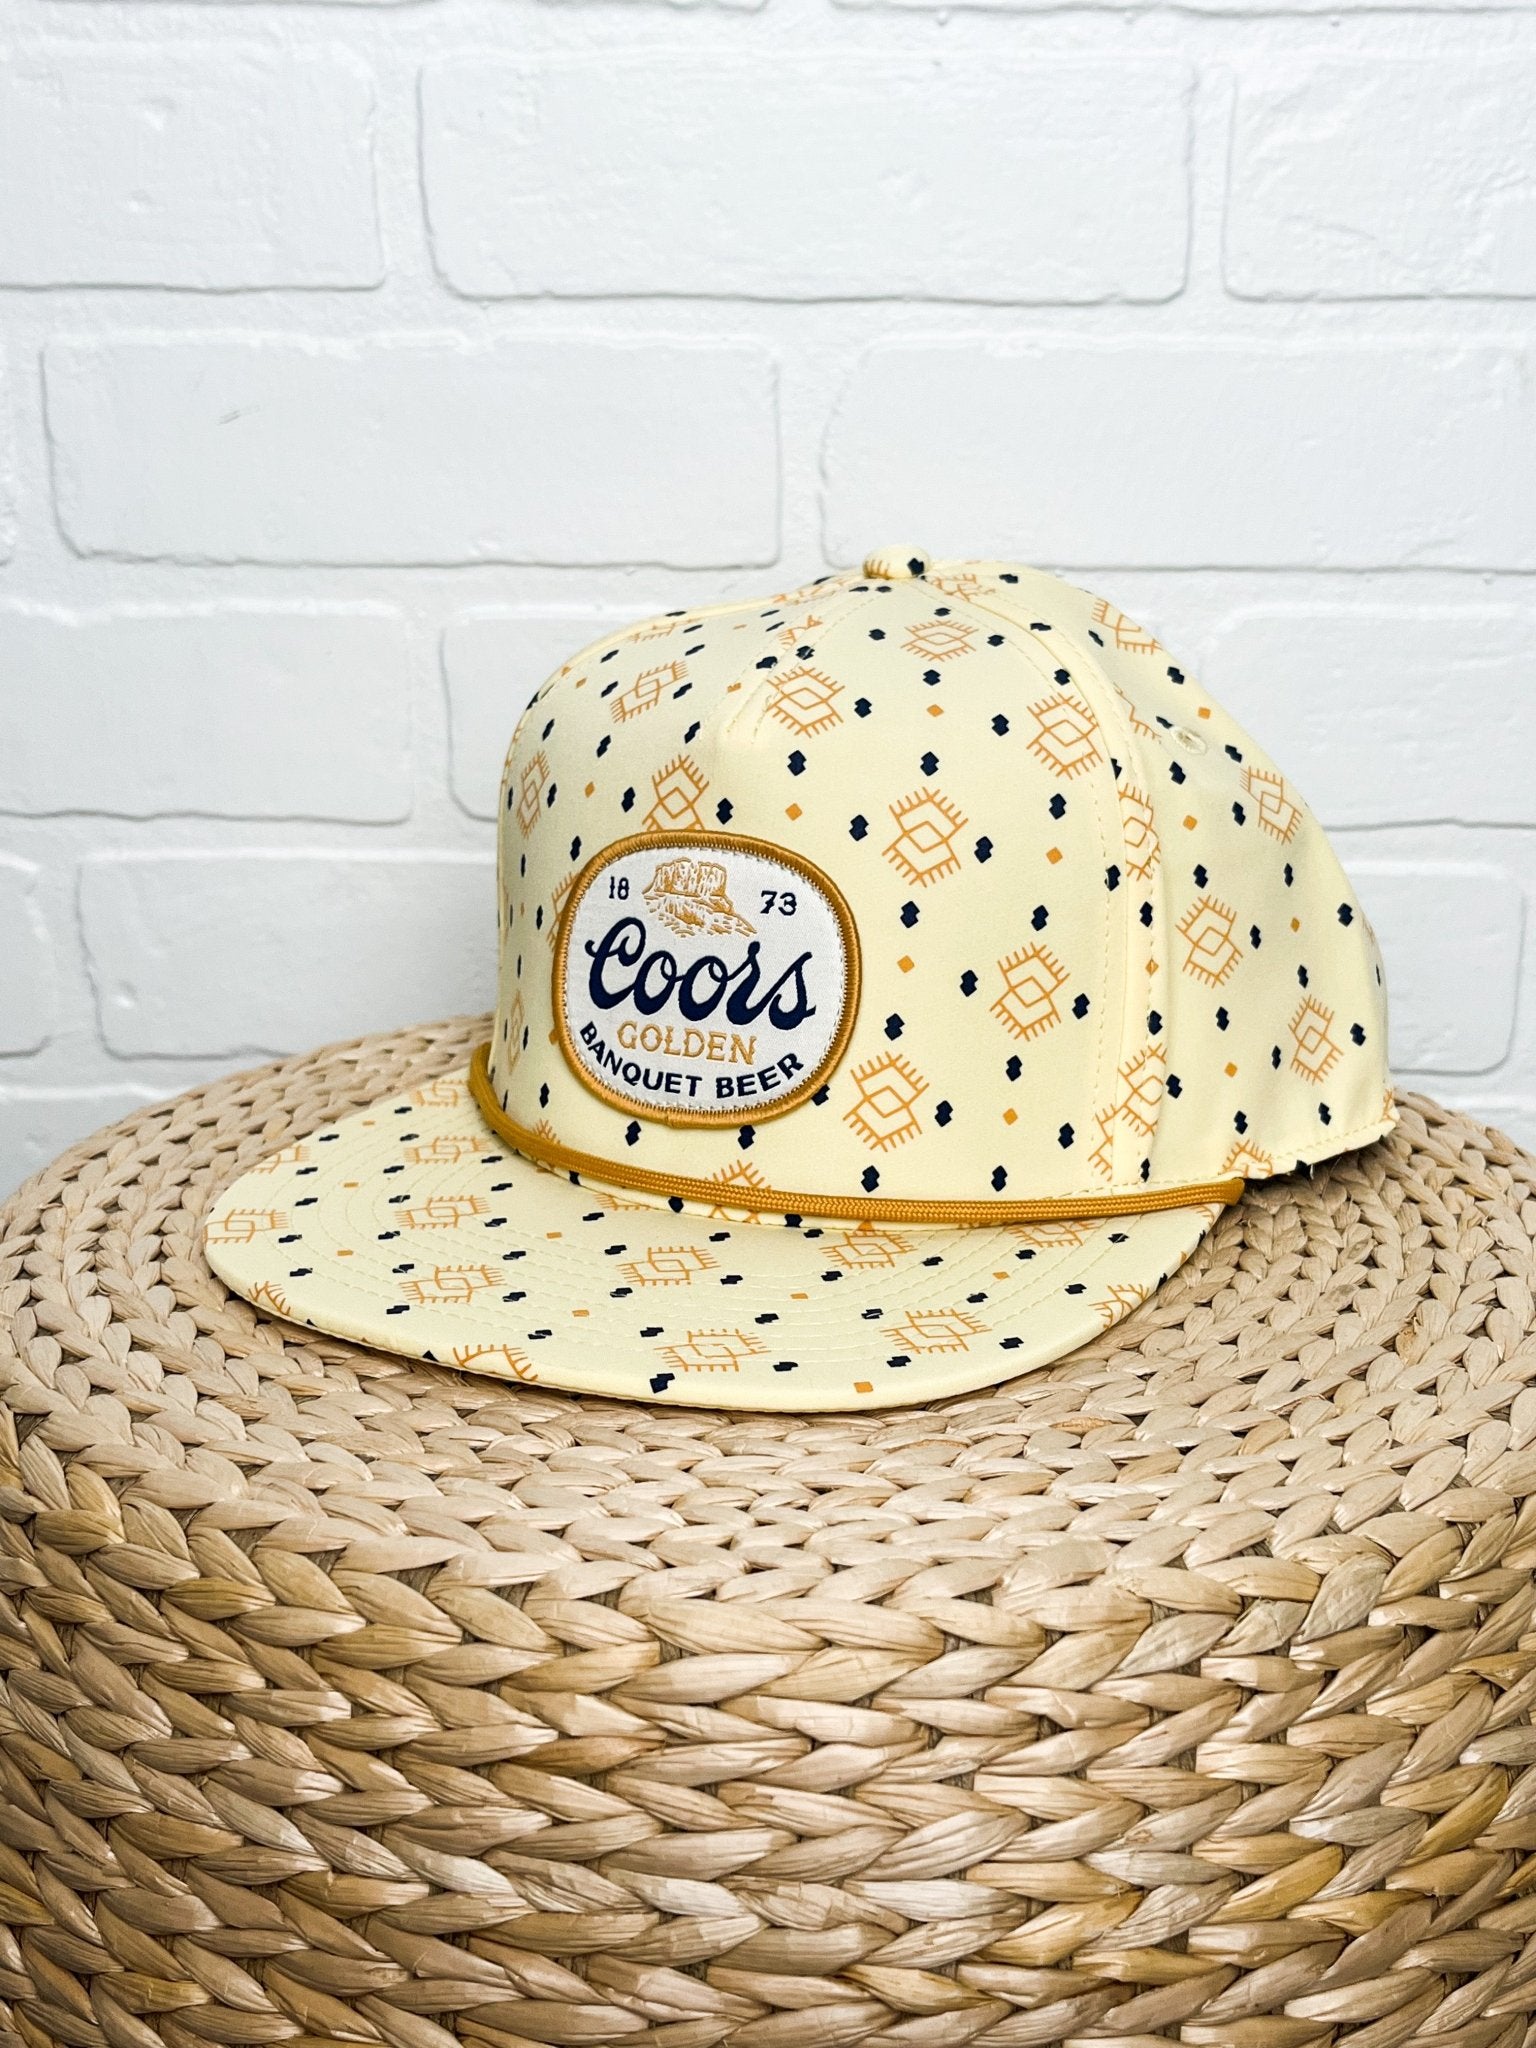 Coors banquet mojave hat butter - Trendy Gifts at Lush Fashion Lounge Boutique in Oklahoma City